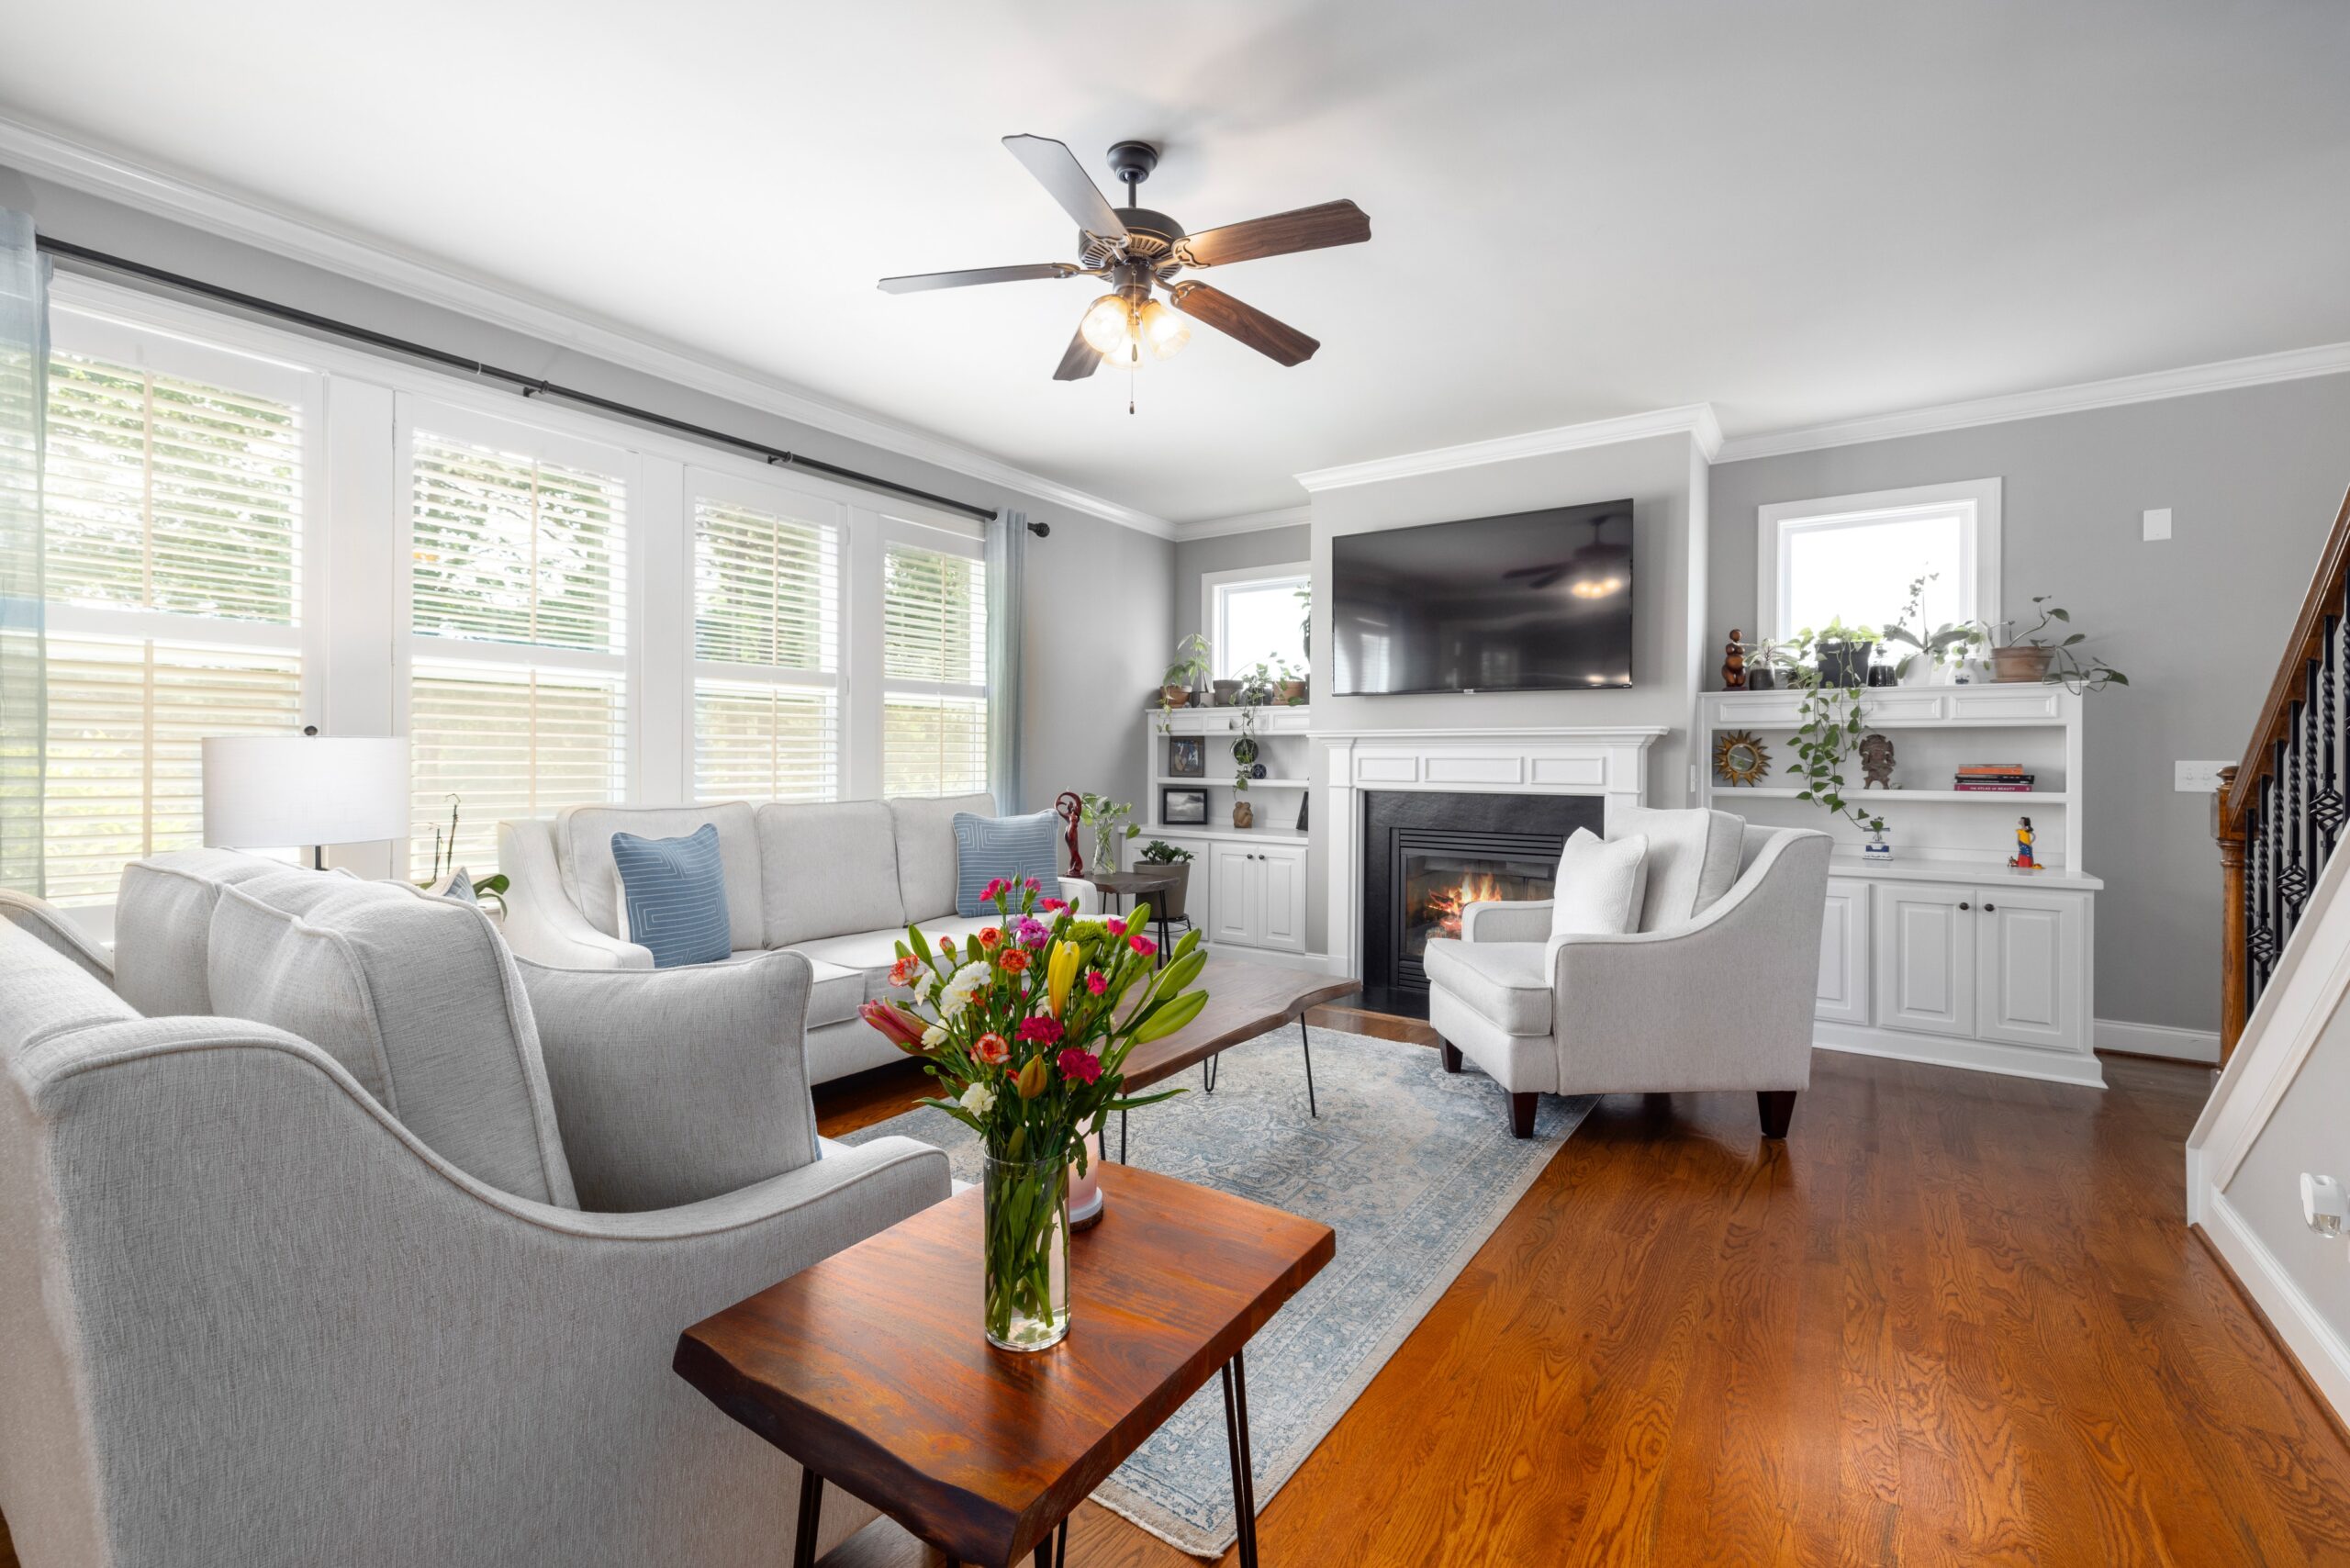 Home Staging in 2023 Can Be More Affordable than You Think